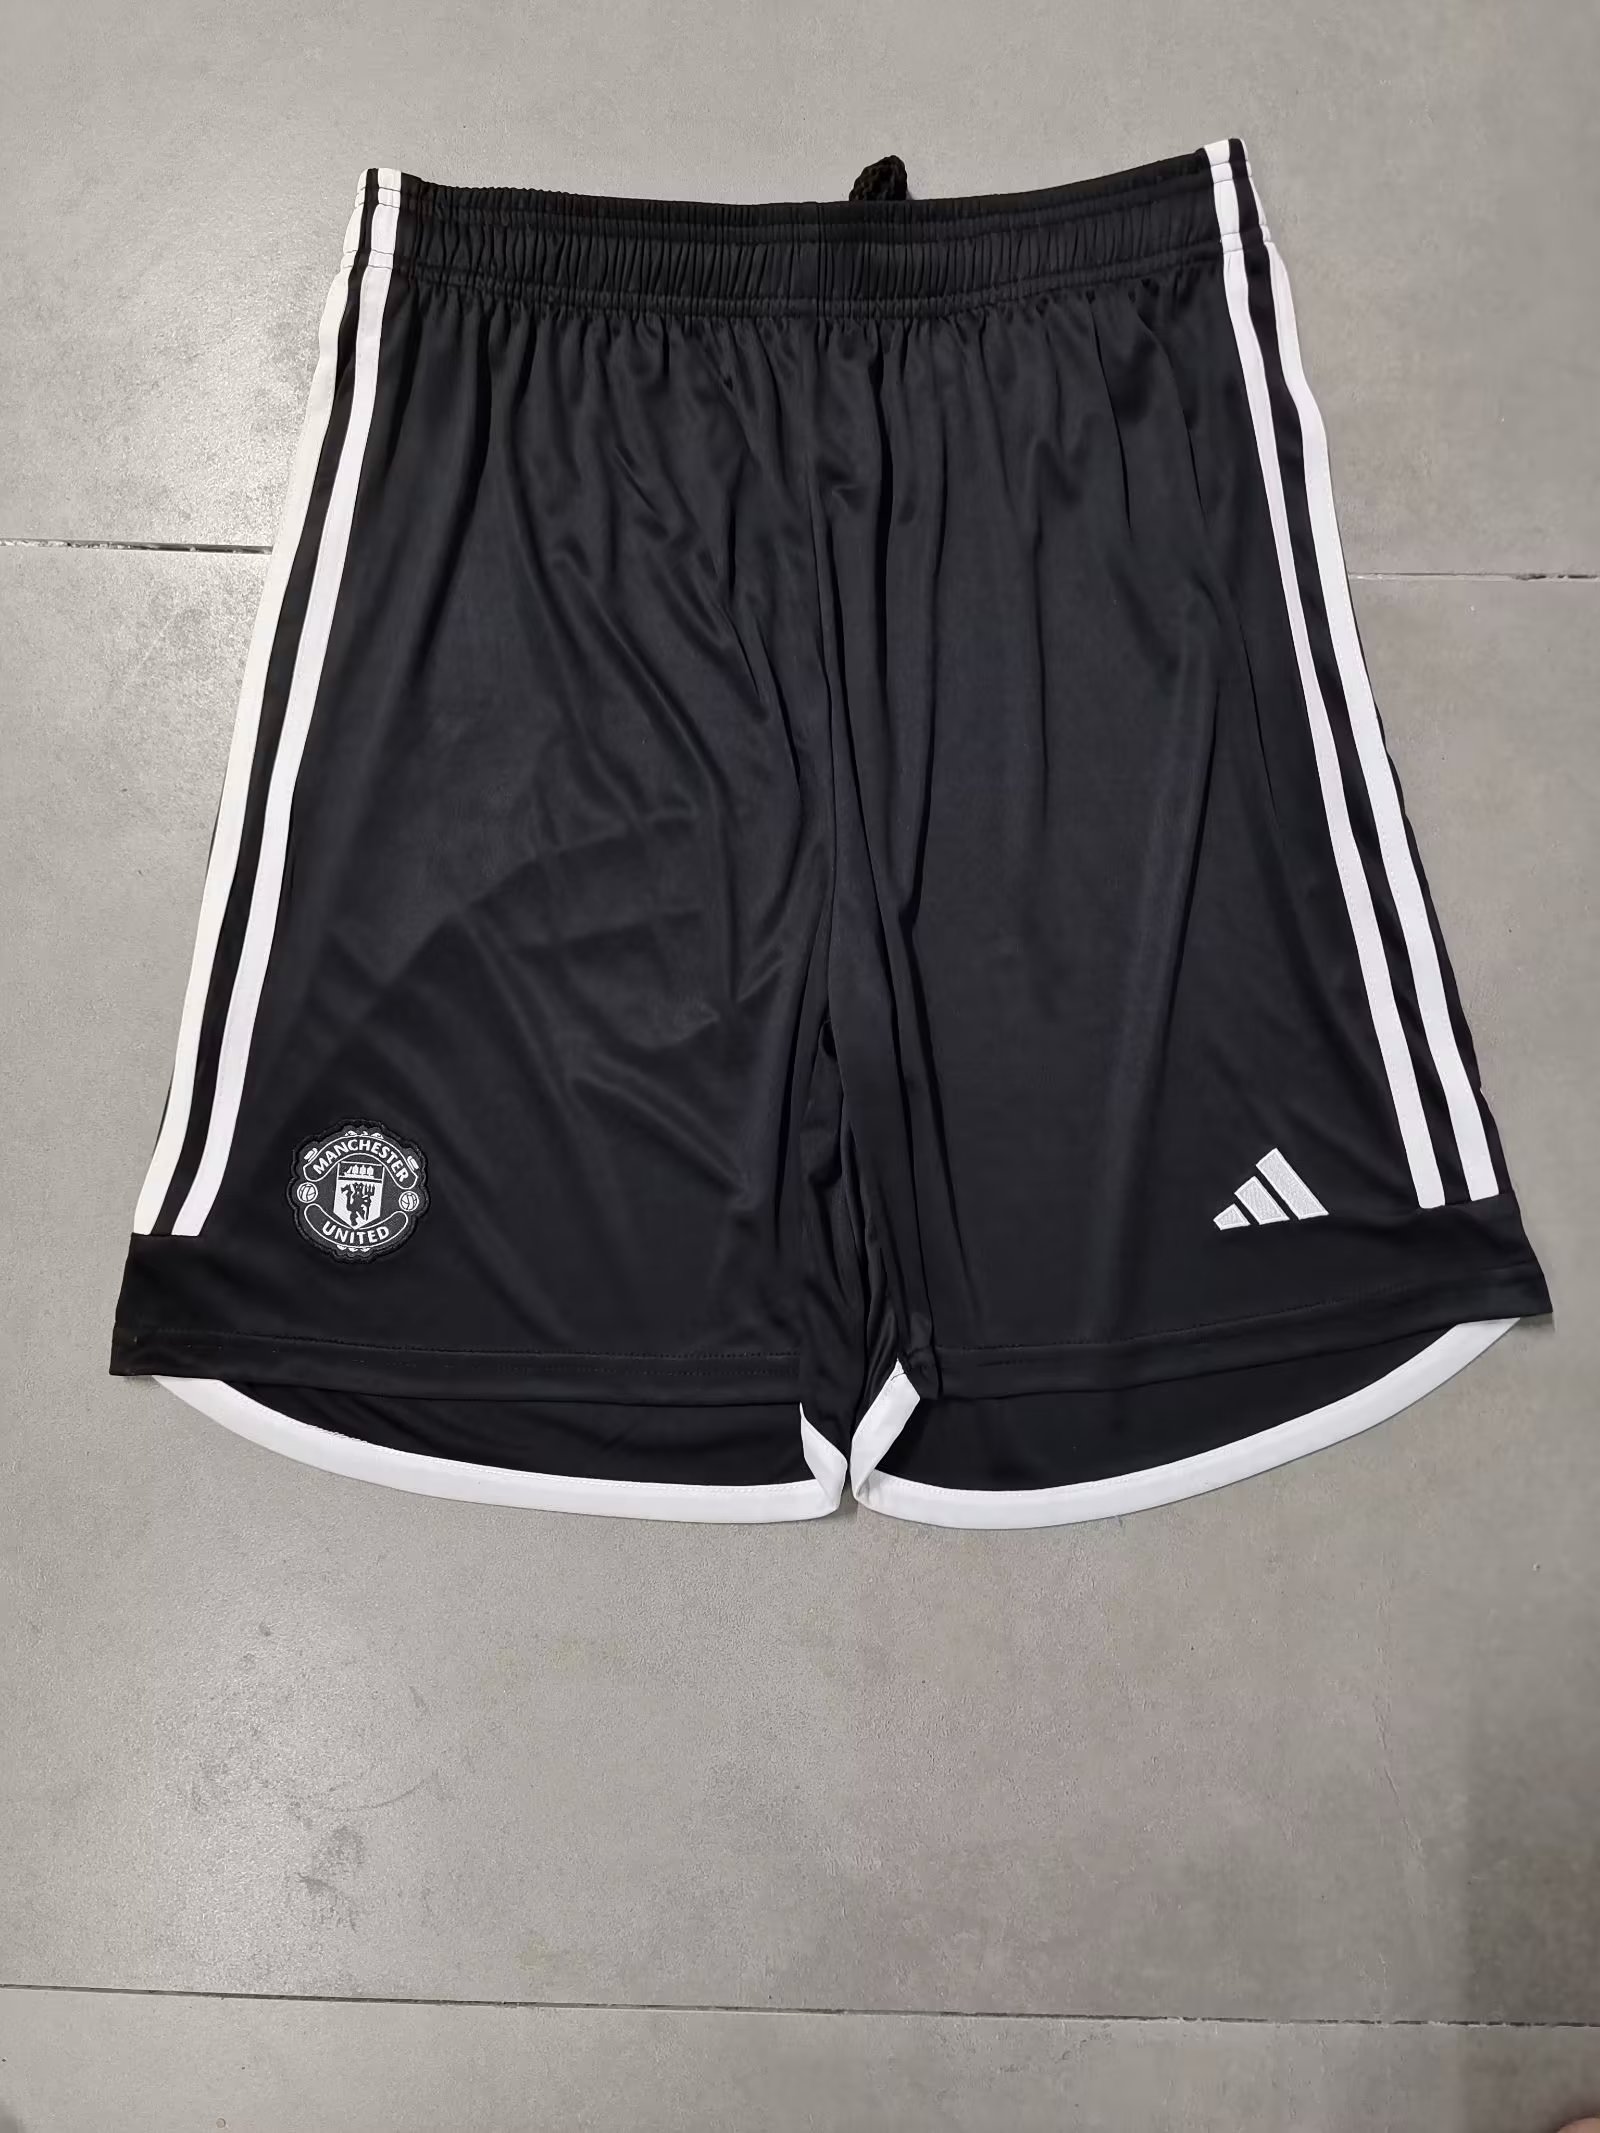 2023/2024 Manchester United away shorts